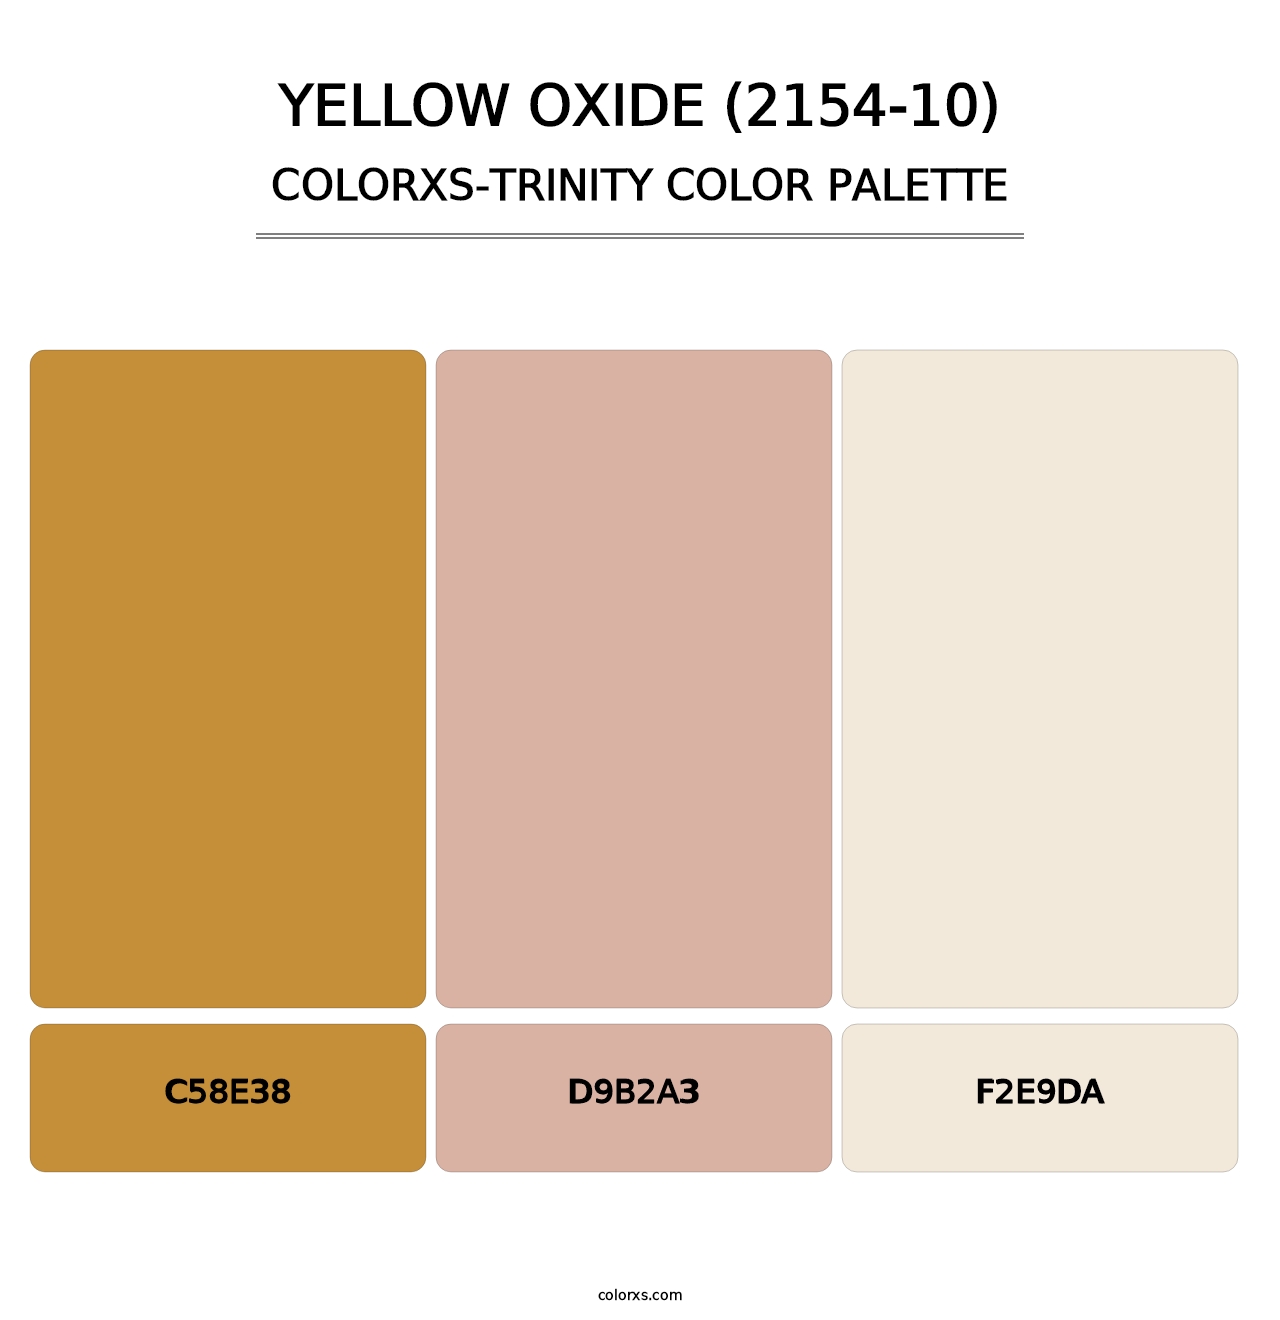 Yellow Oxide (2154-10) - Colorxs Trinity Palette